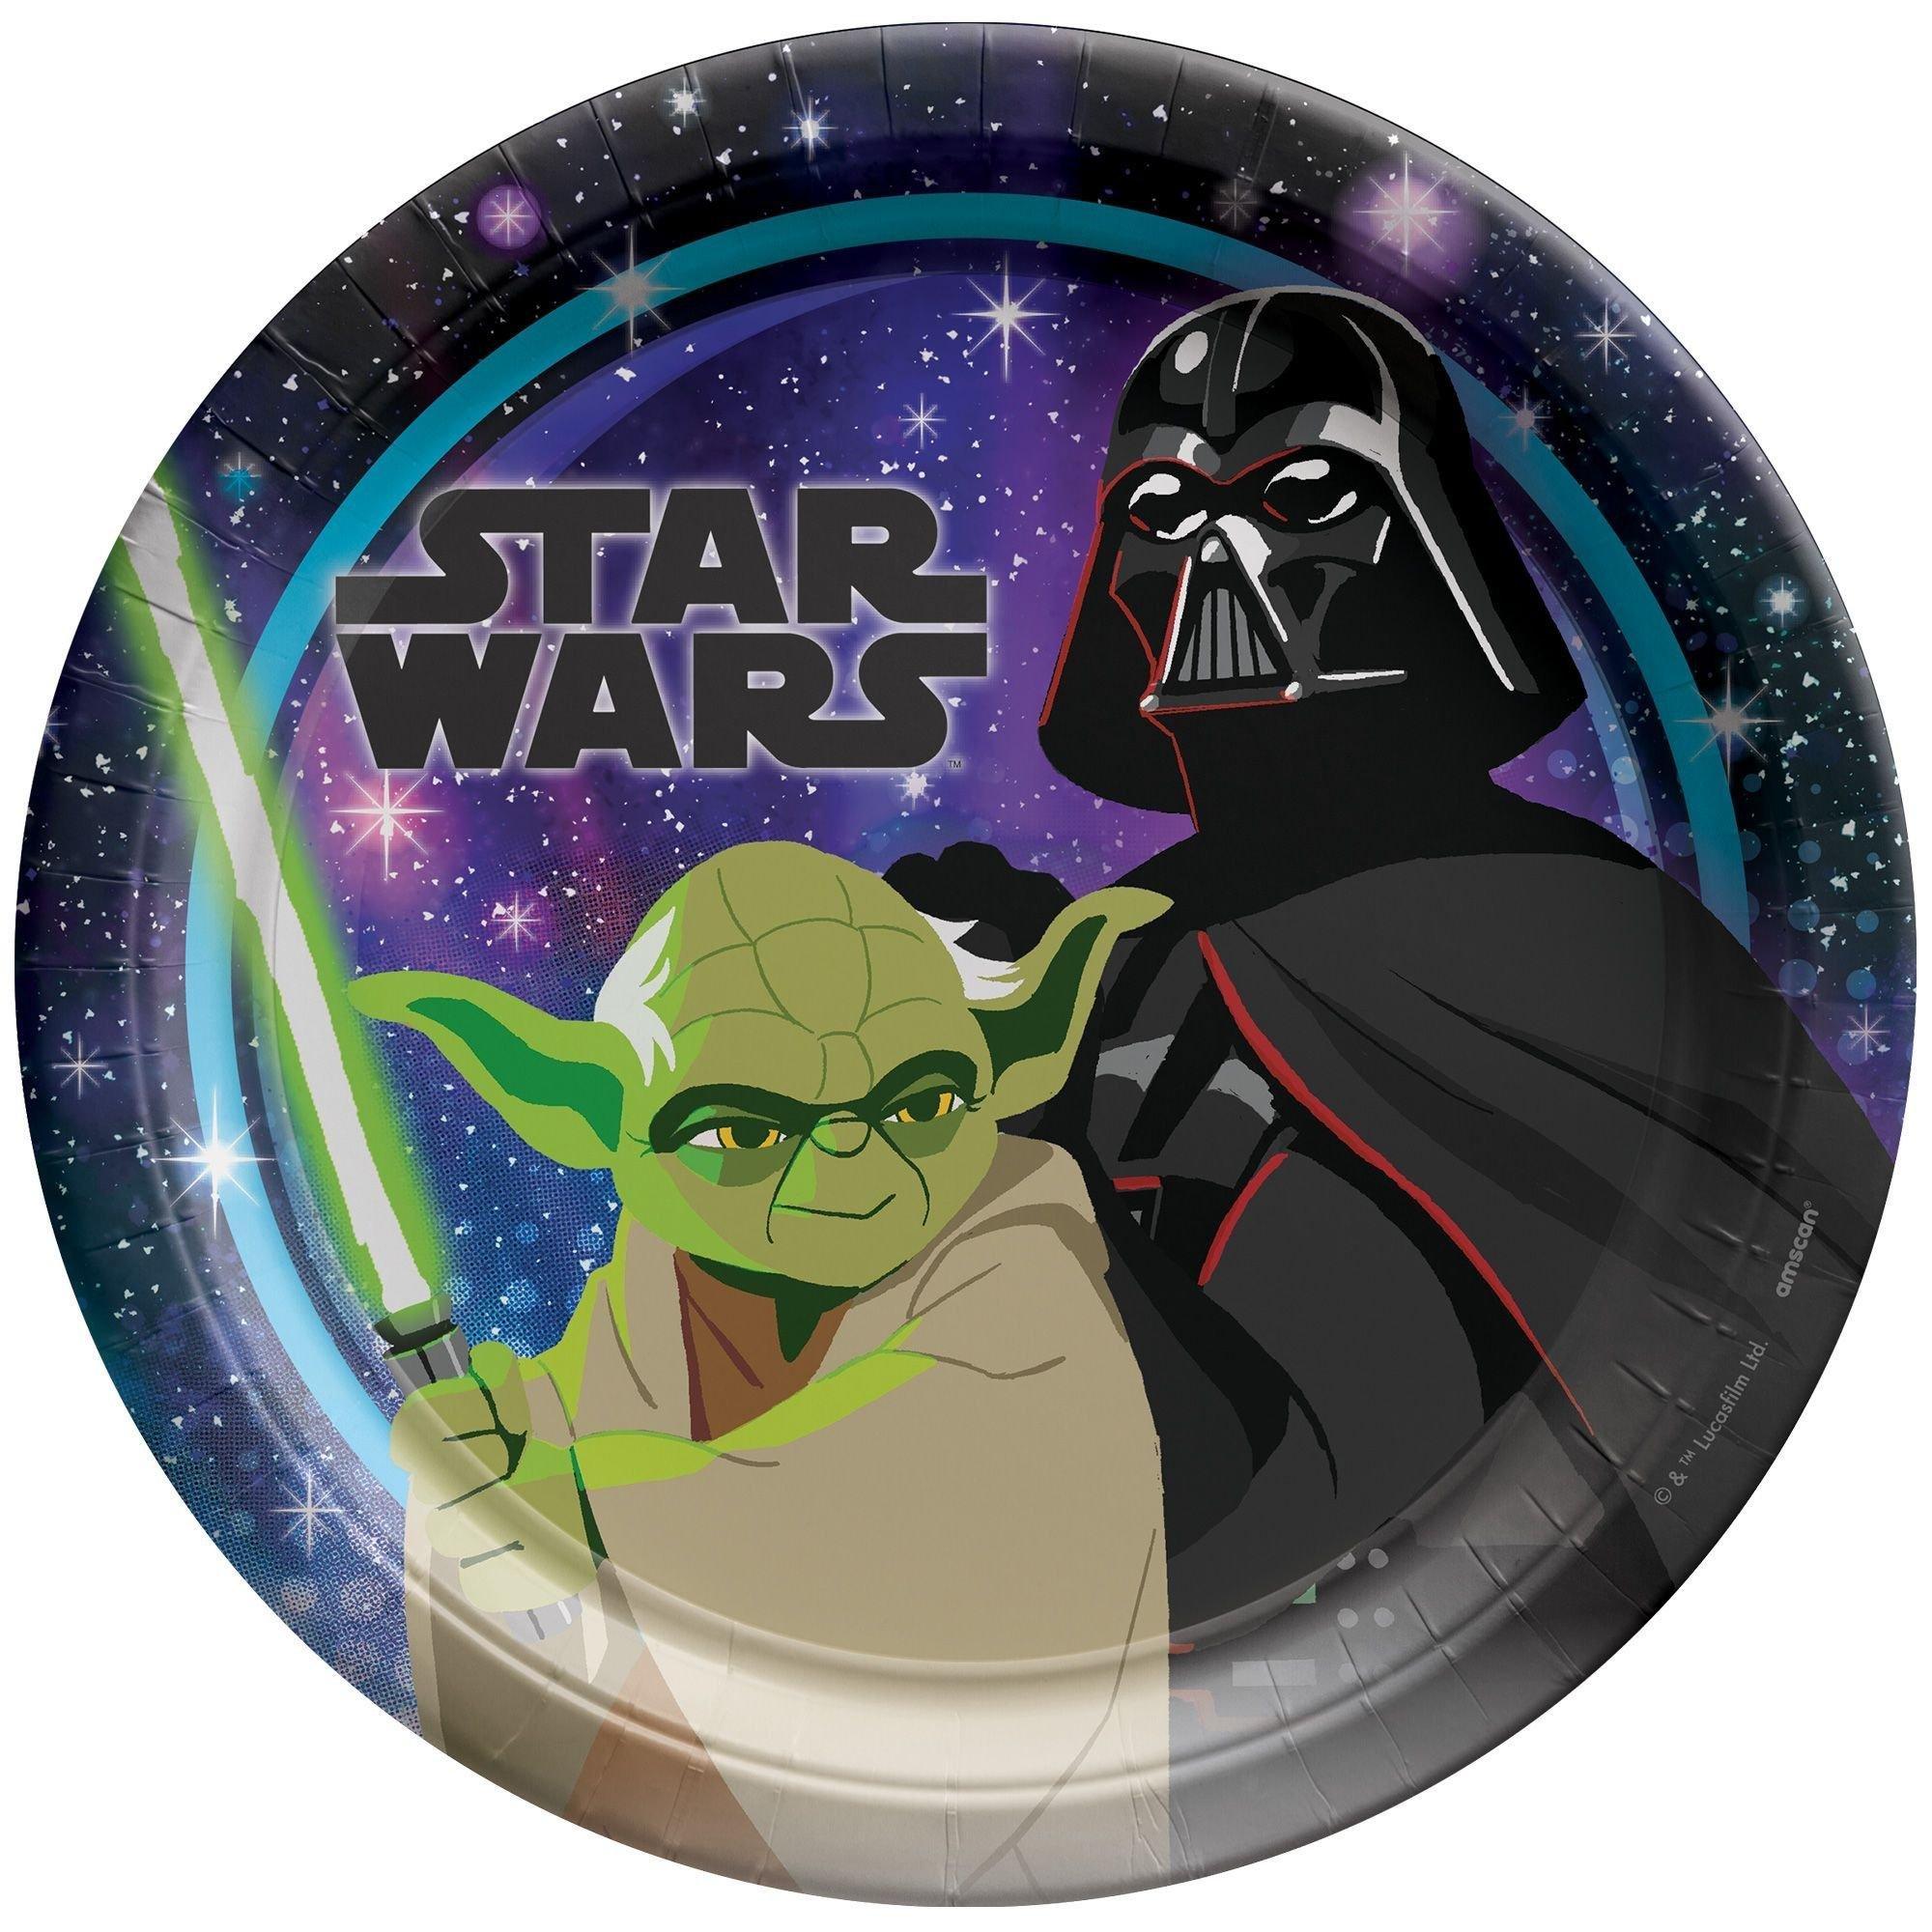 Star Wars Galaxy of Adventures Birthday Party Supplies Pack for 8 Guests - Kit Includes Plates, Napkins, Table Cover, Banner Decorations & Candle